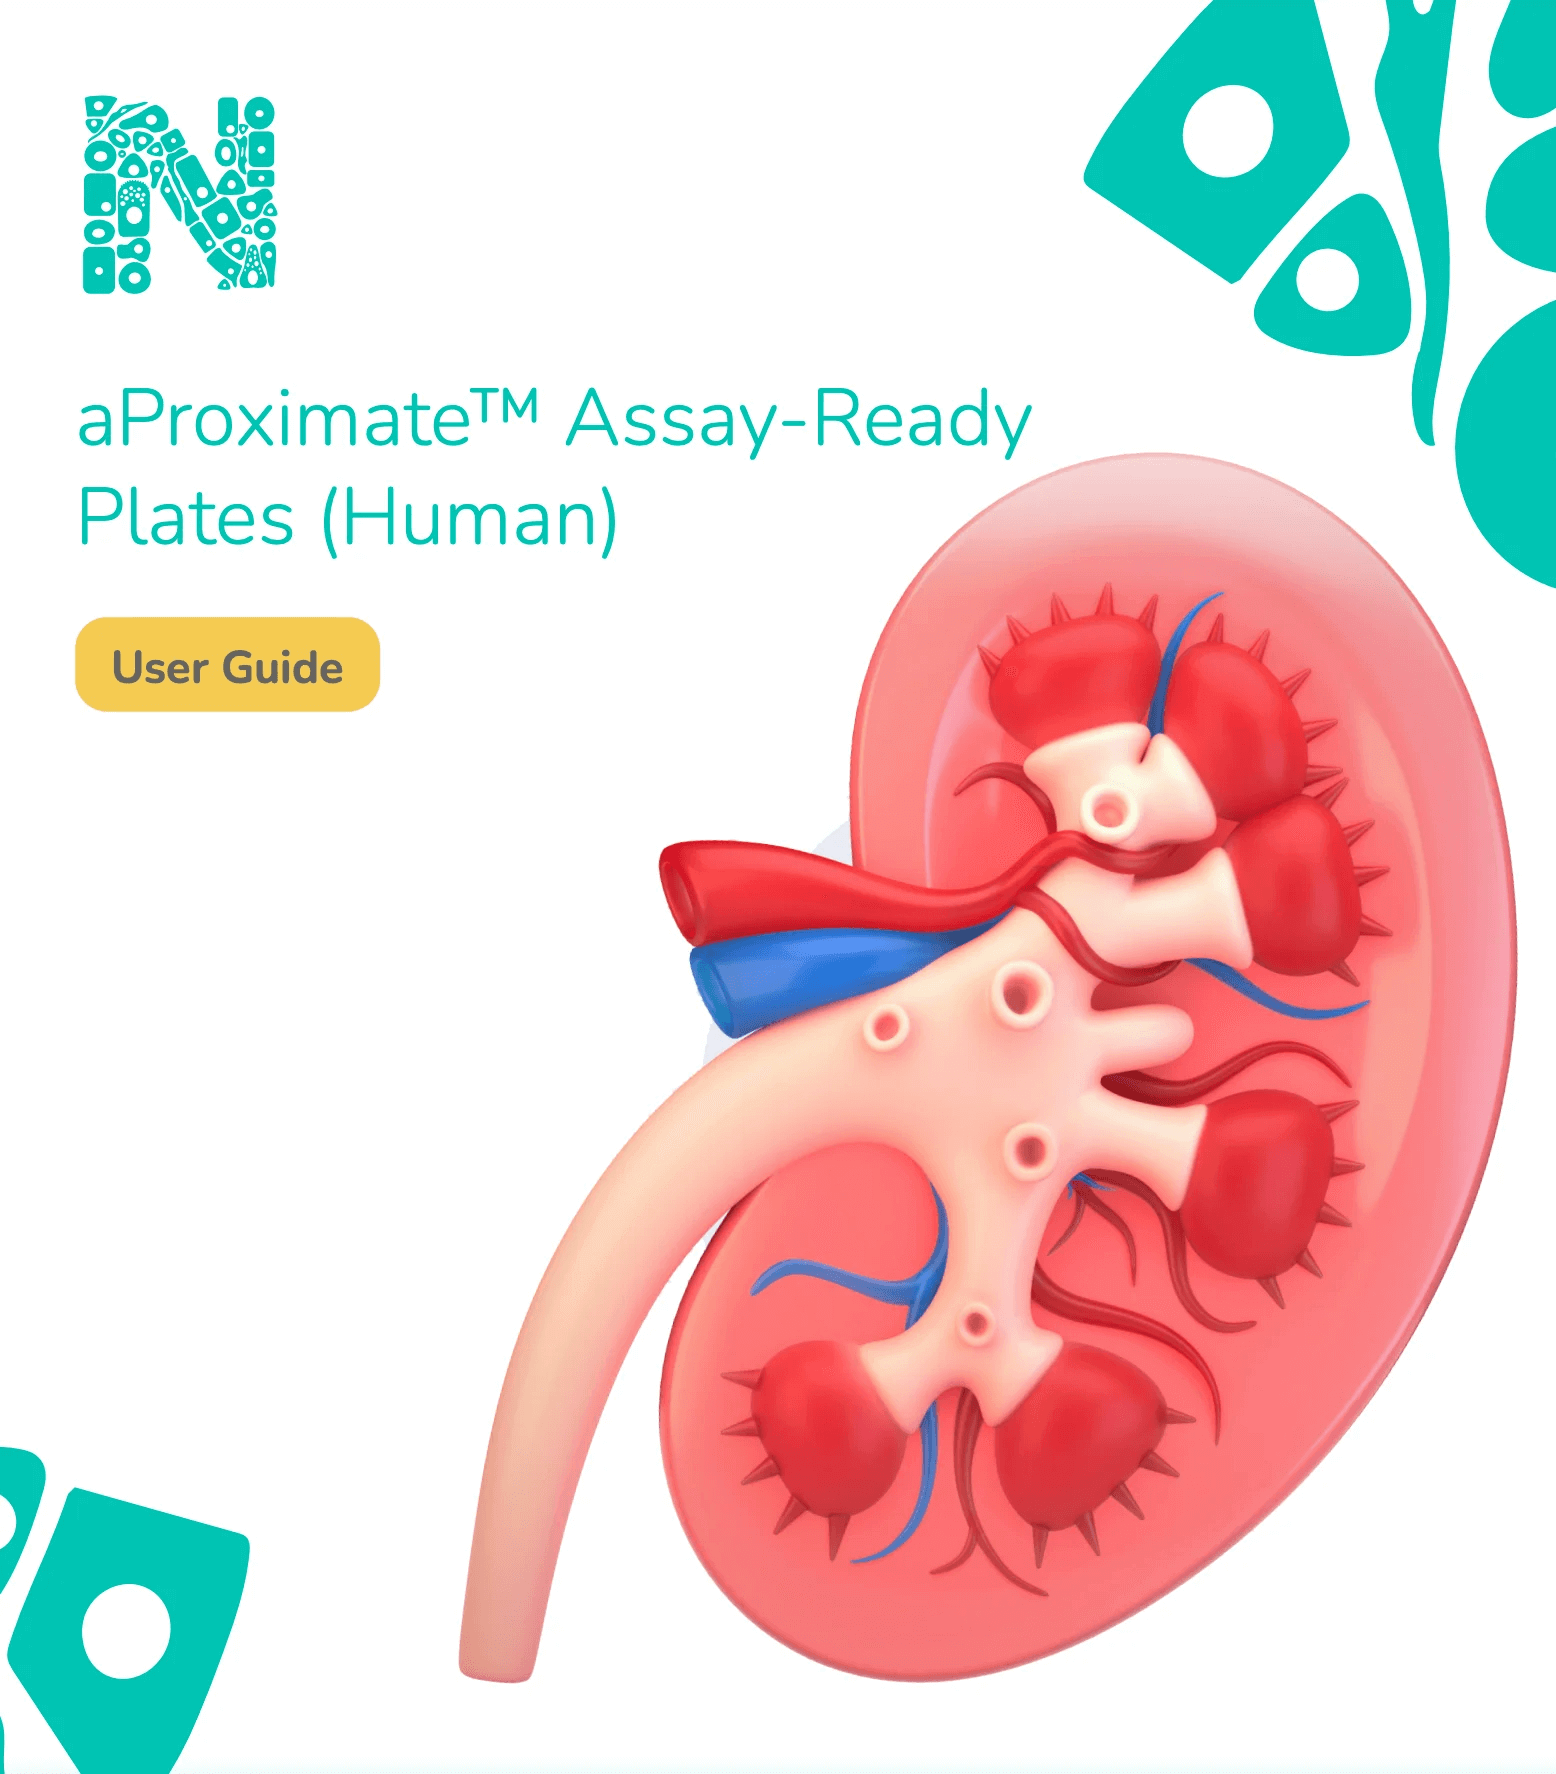 aProximate Assay-Ready Plates (Human) User Guide